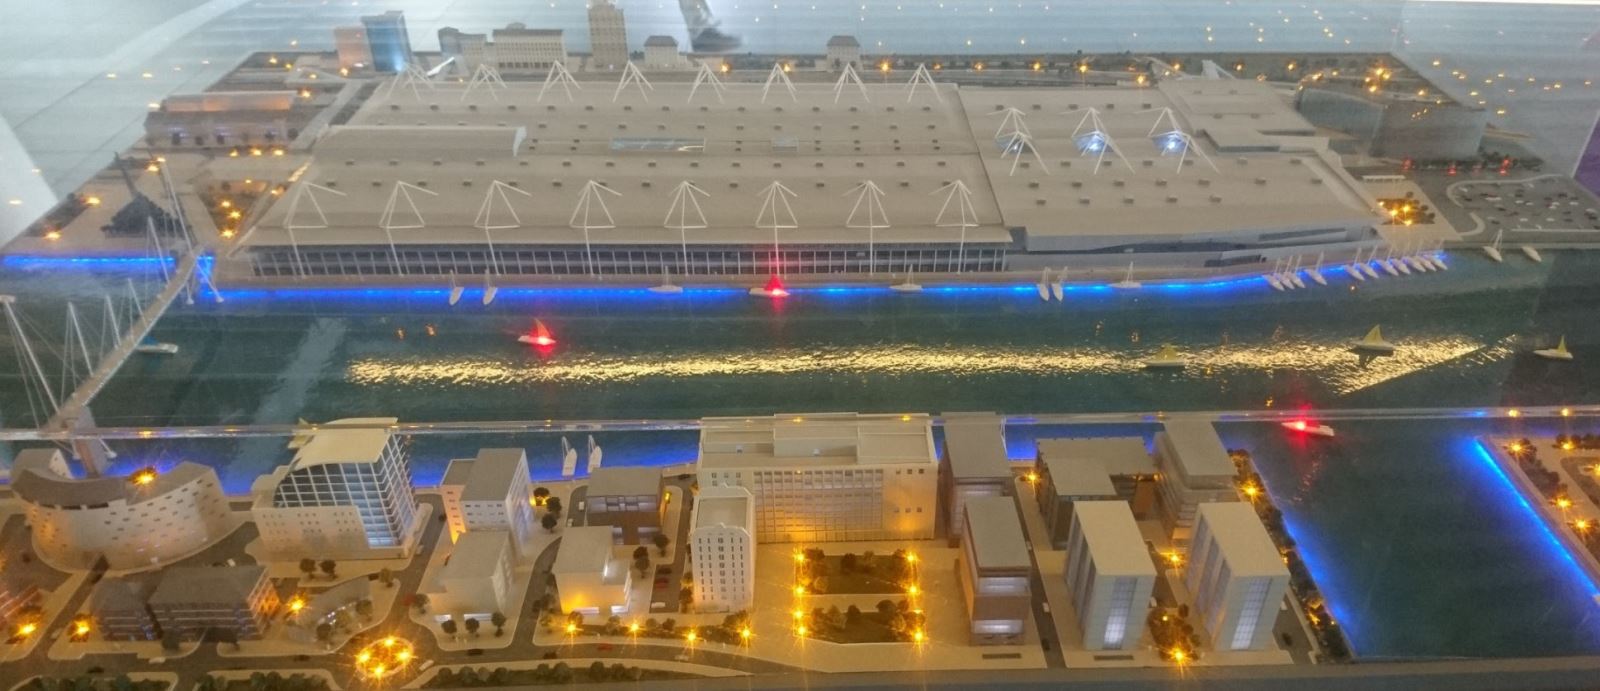 model of the ExCeL centre and surrounding area - London